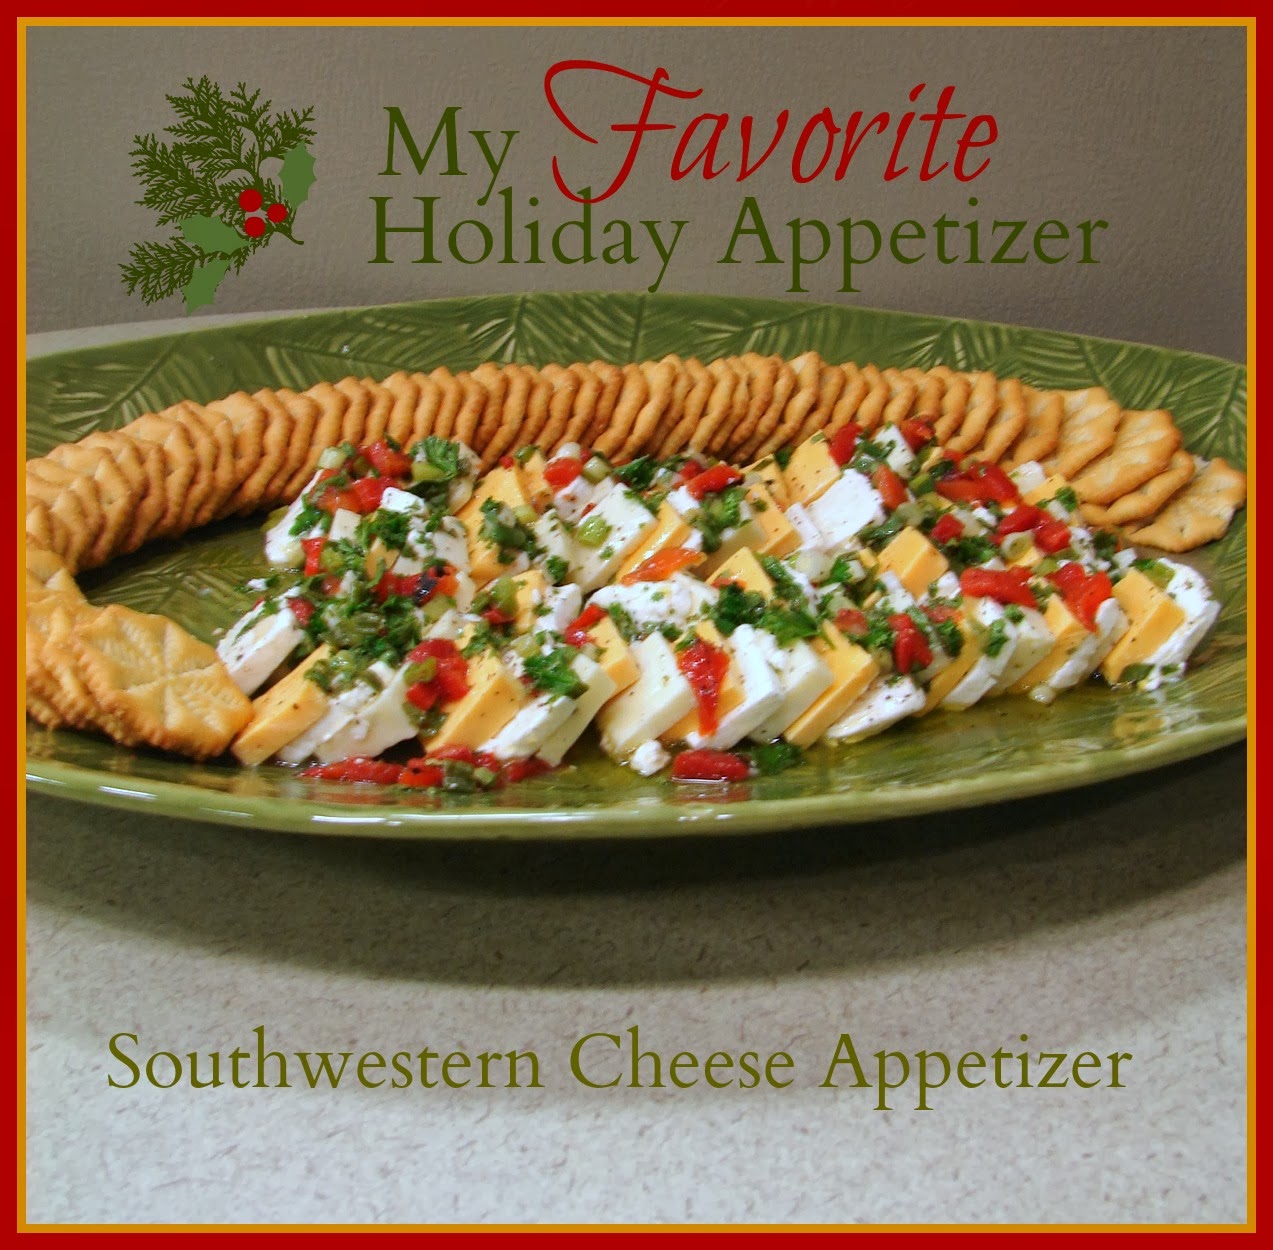 Custom Comforts: My Favorite Holiday Appetizer